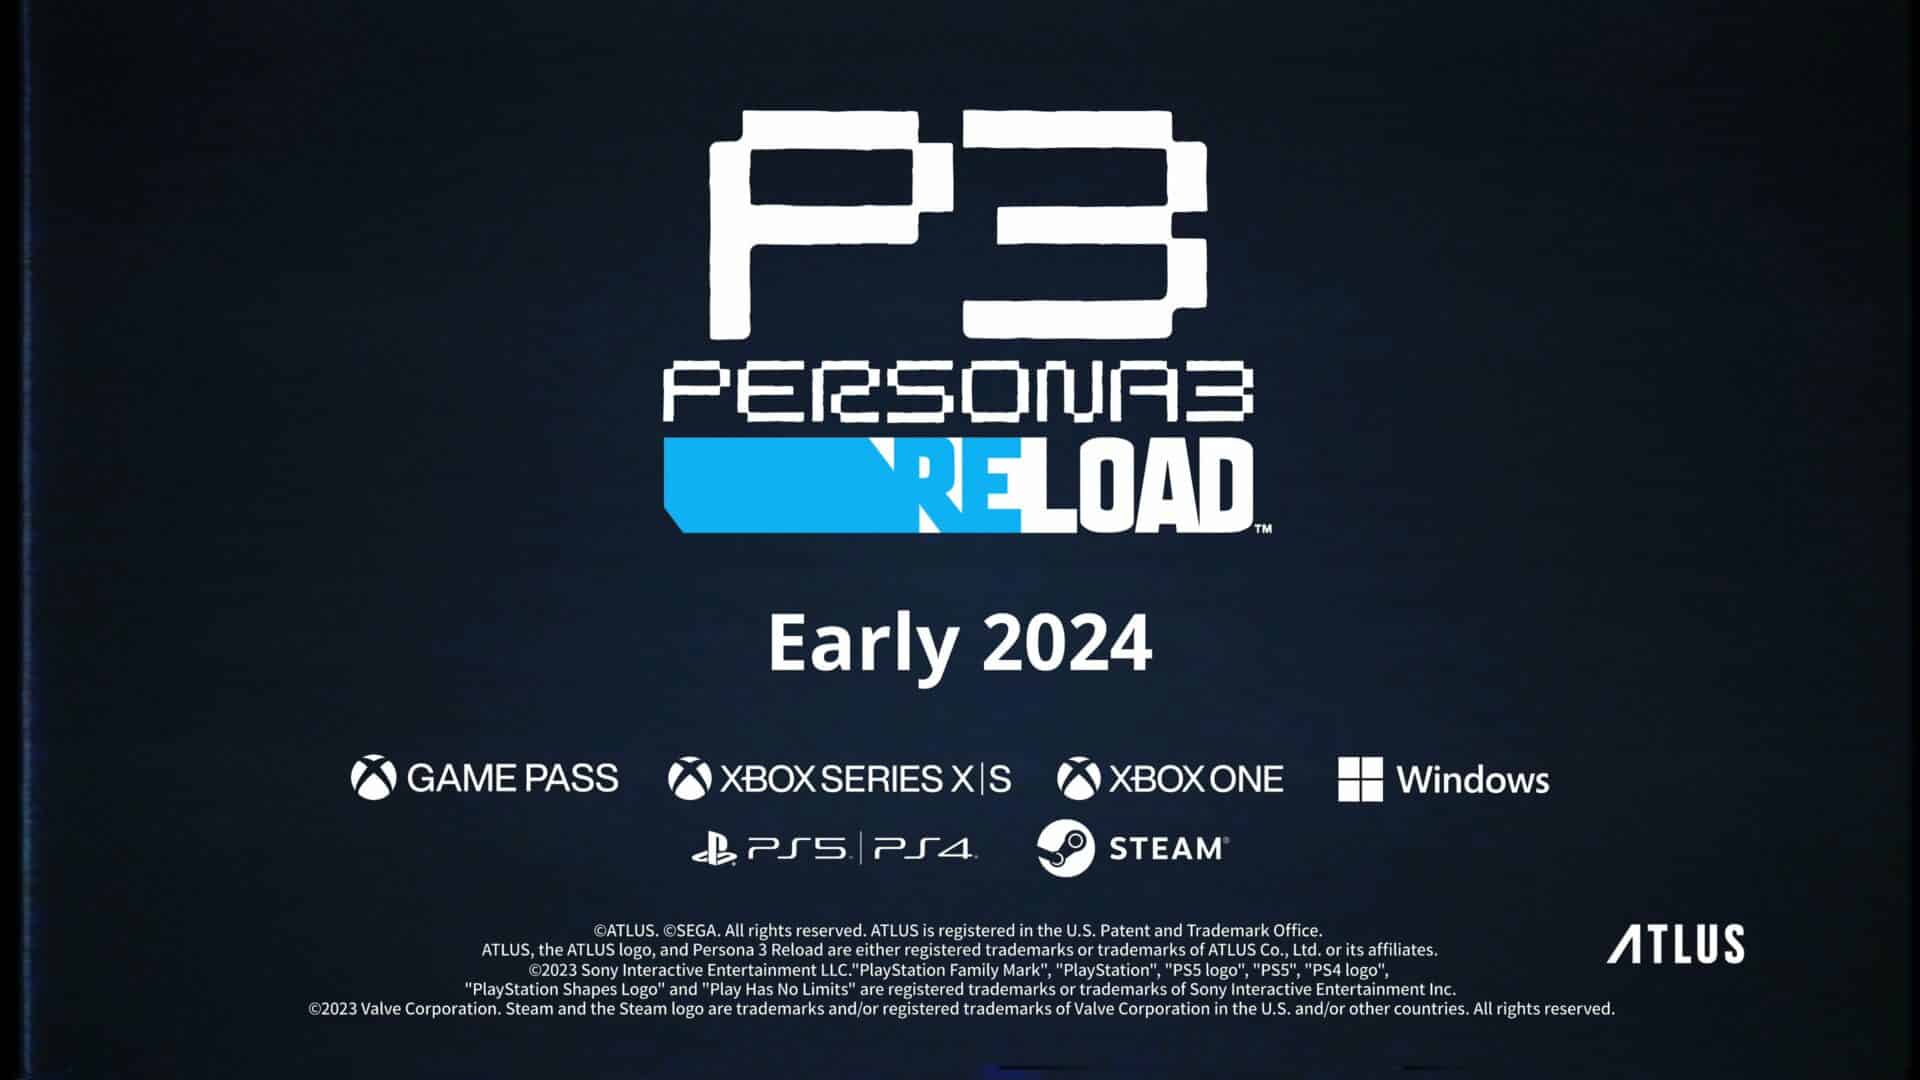 A list of Platforms for Persona 3 Reload